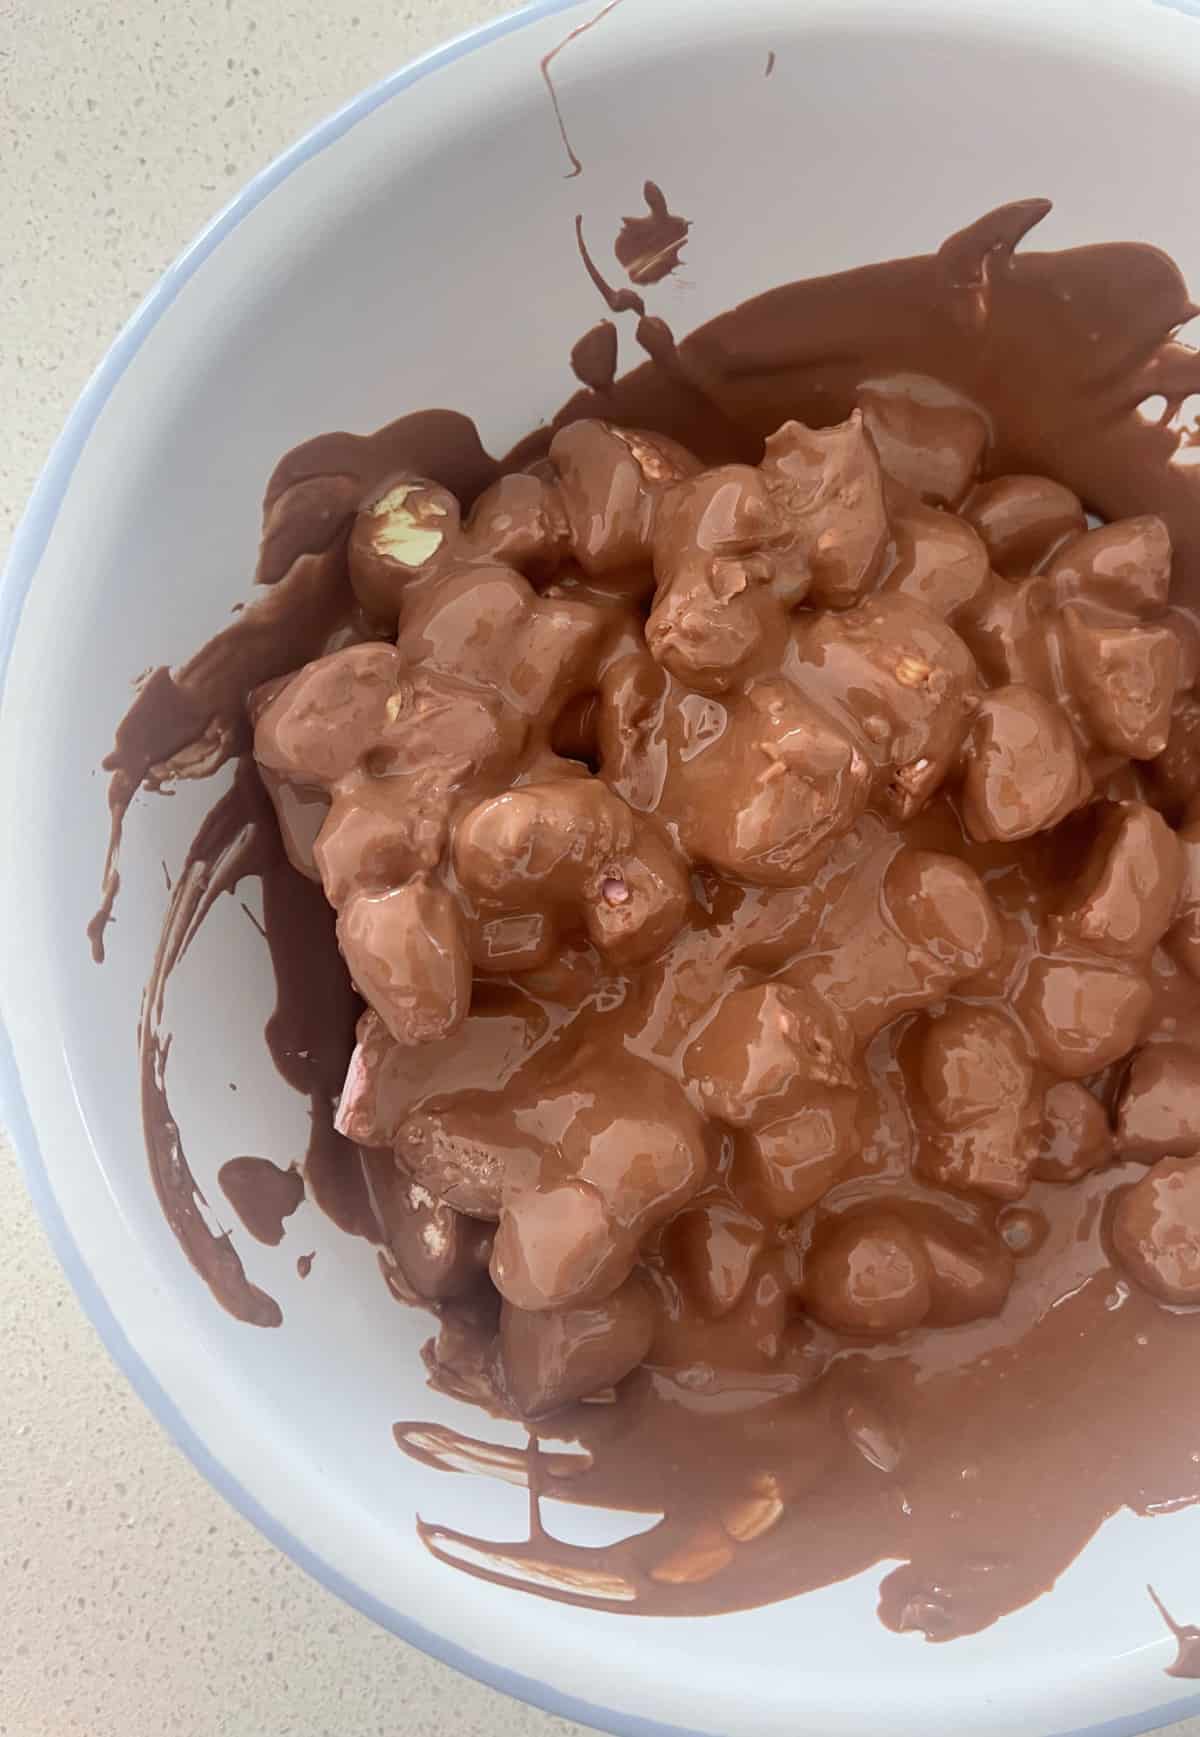 Melted chocolate over rock road ingredients in a white bowl.